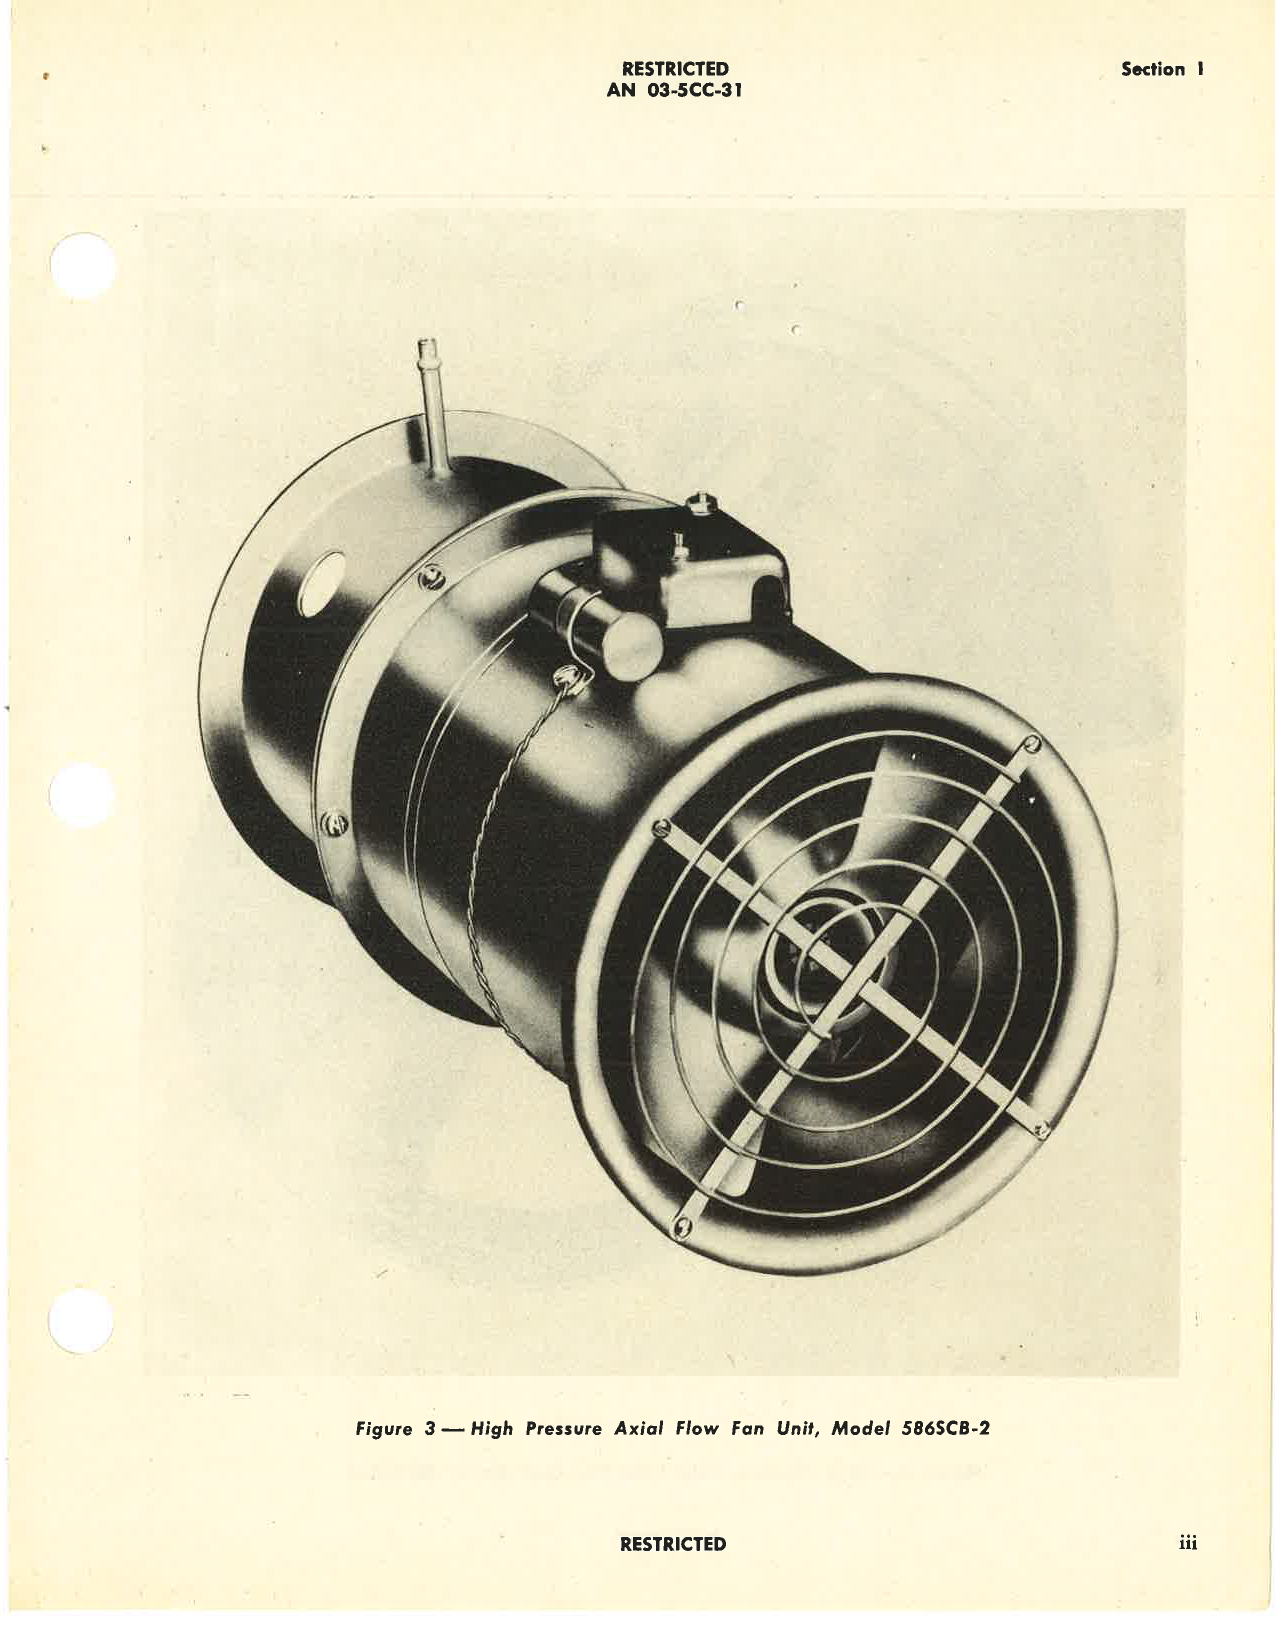 Sample page 5 from AirCorps Library document: Overhaul Instructions with Parts Catalog for High Pressure Axial Flow Fan Units